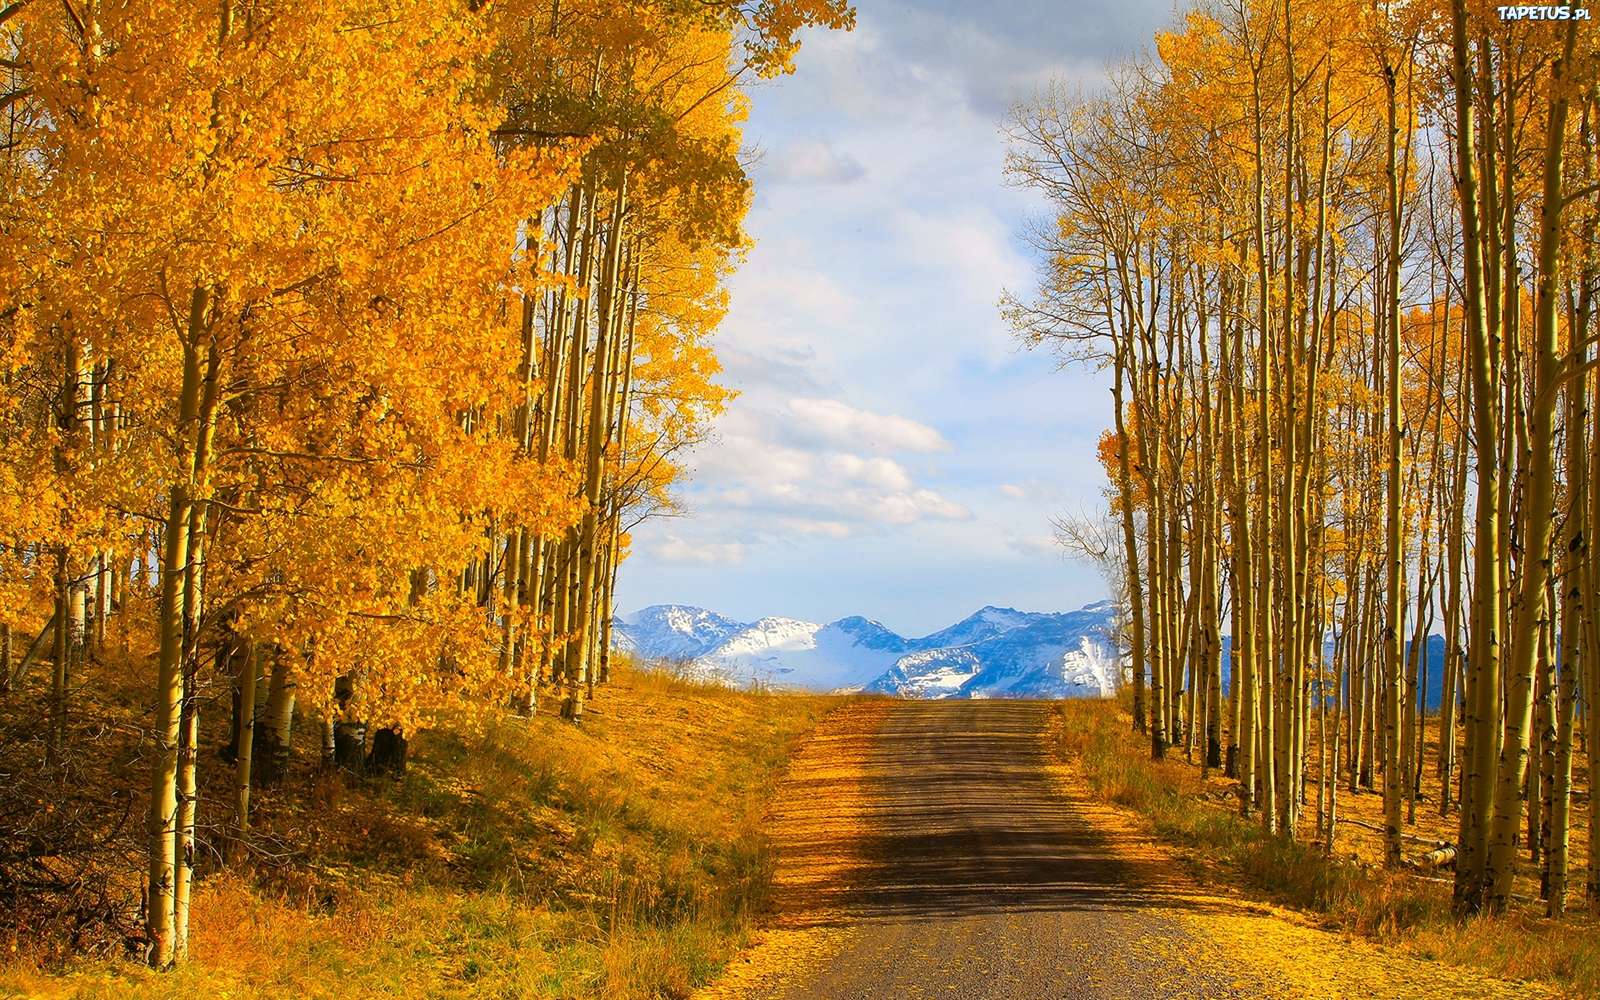 Road to the mountains. jigsaw puzzle online